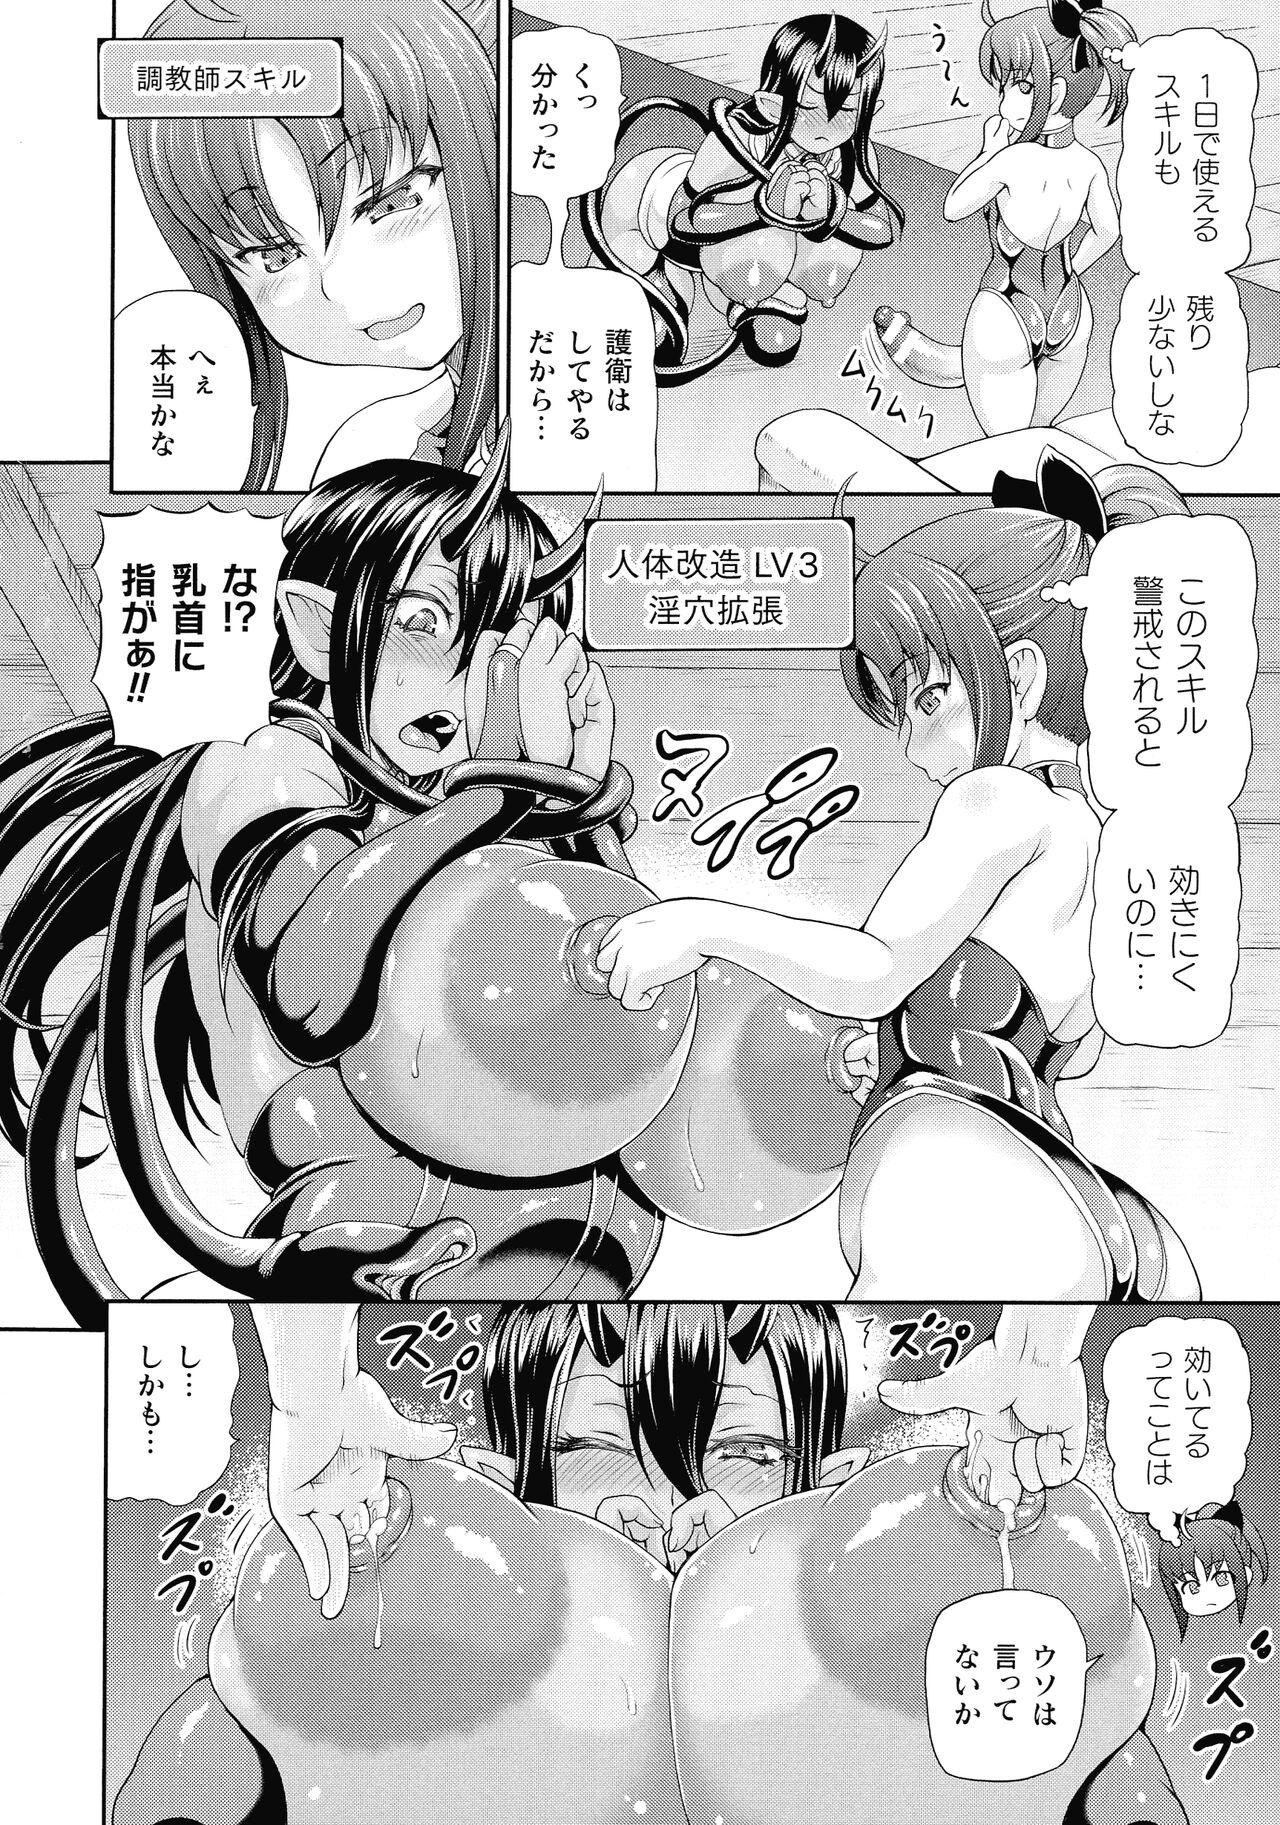 Isekai Shoukan 3 - Brothel in Another World 41